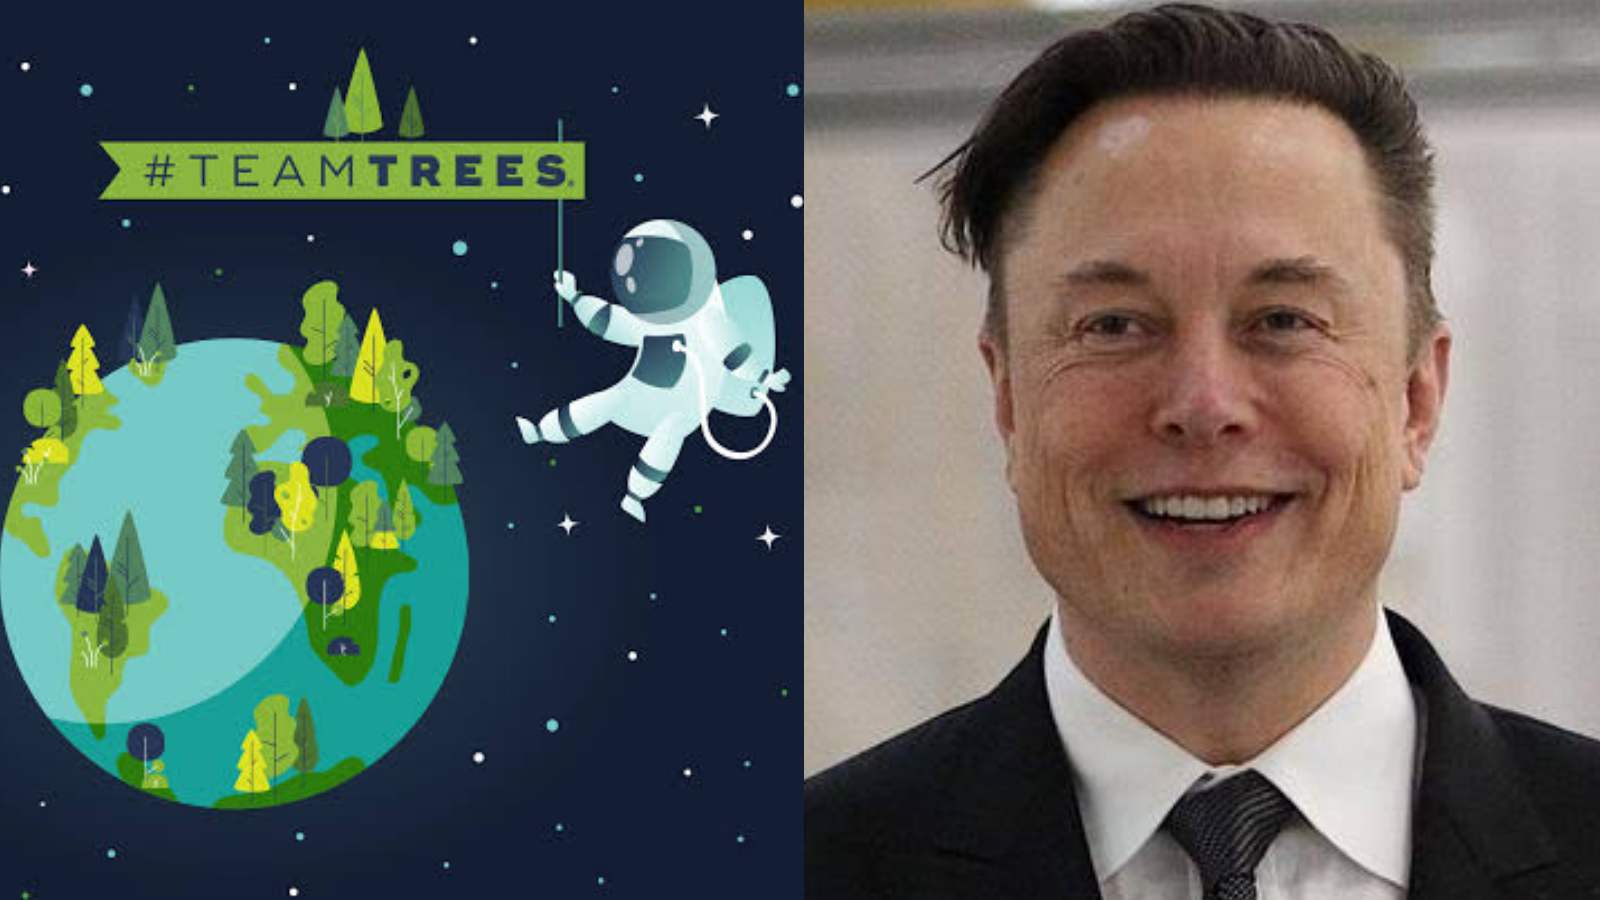 Elon Musk donated to #TeamTrees